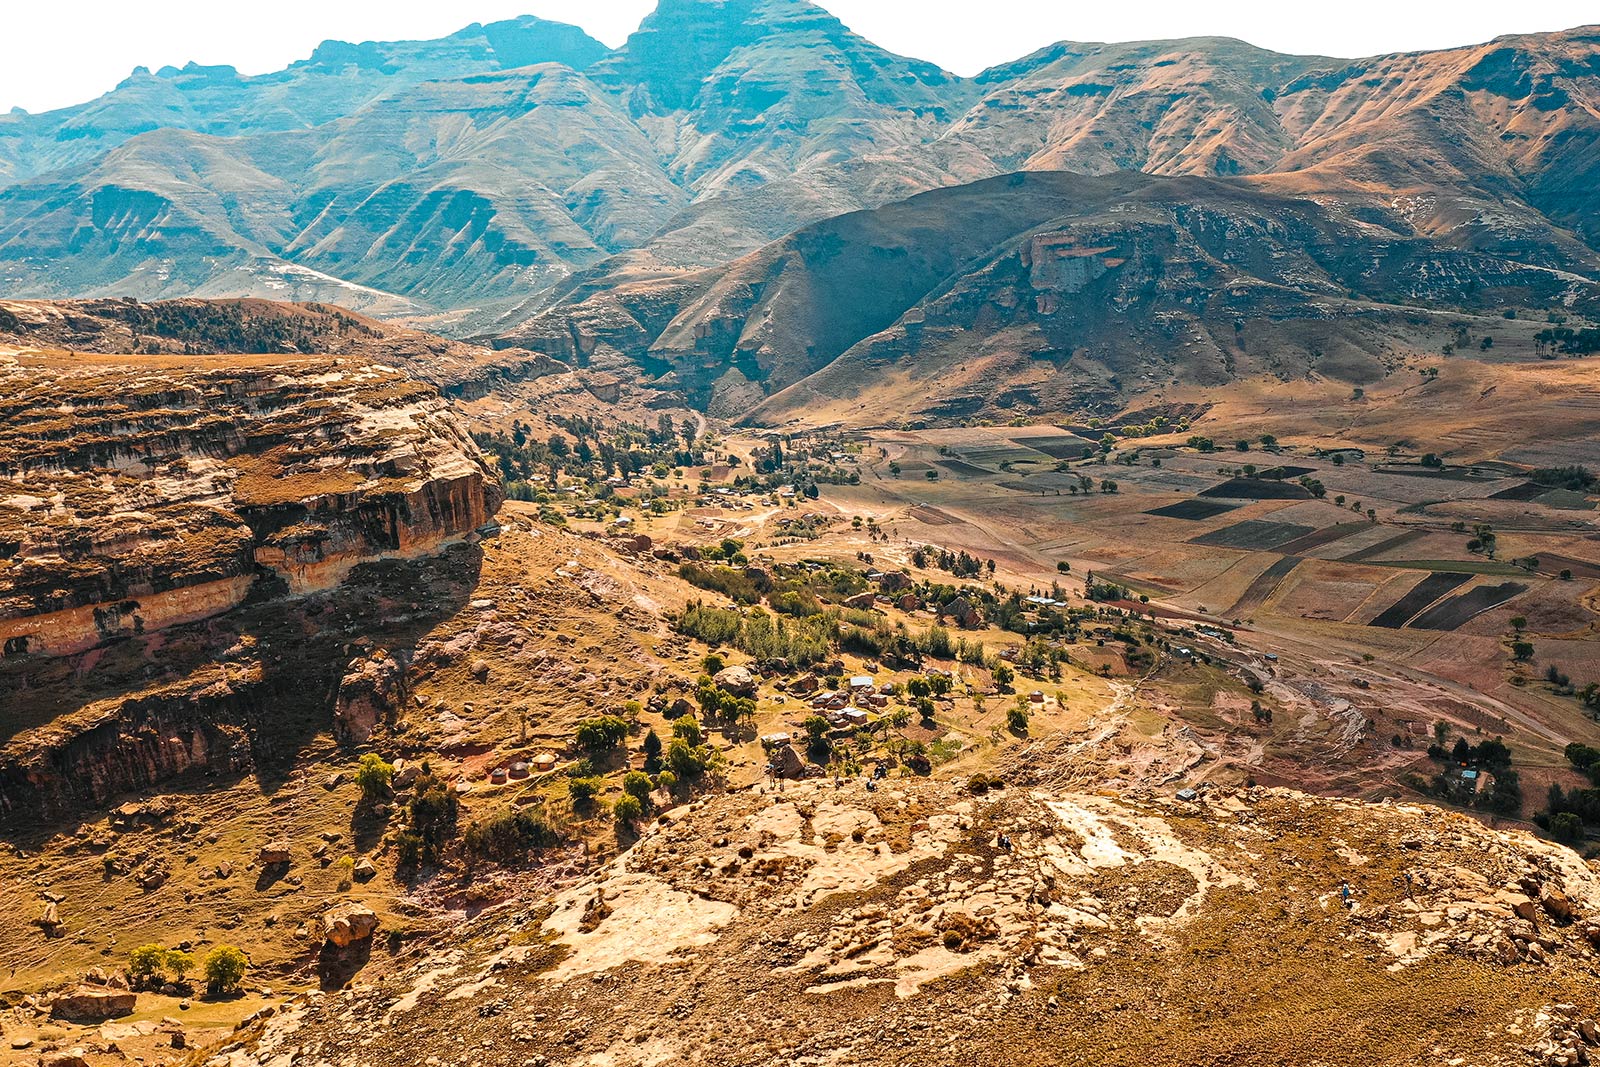 Viewpoint in Lesotho, Africa. Getting drunk with the Maasai tribe in the Drakensberg